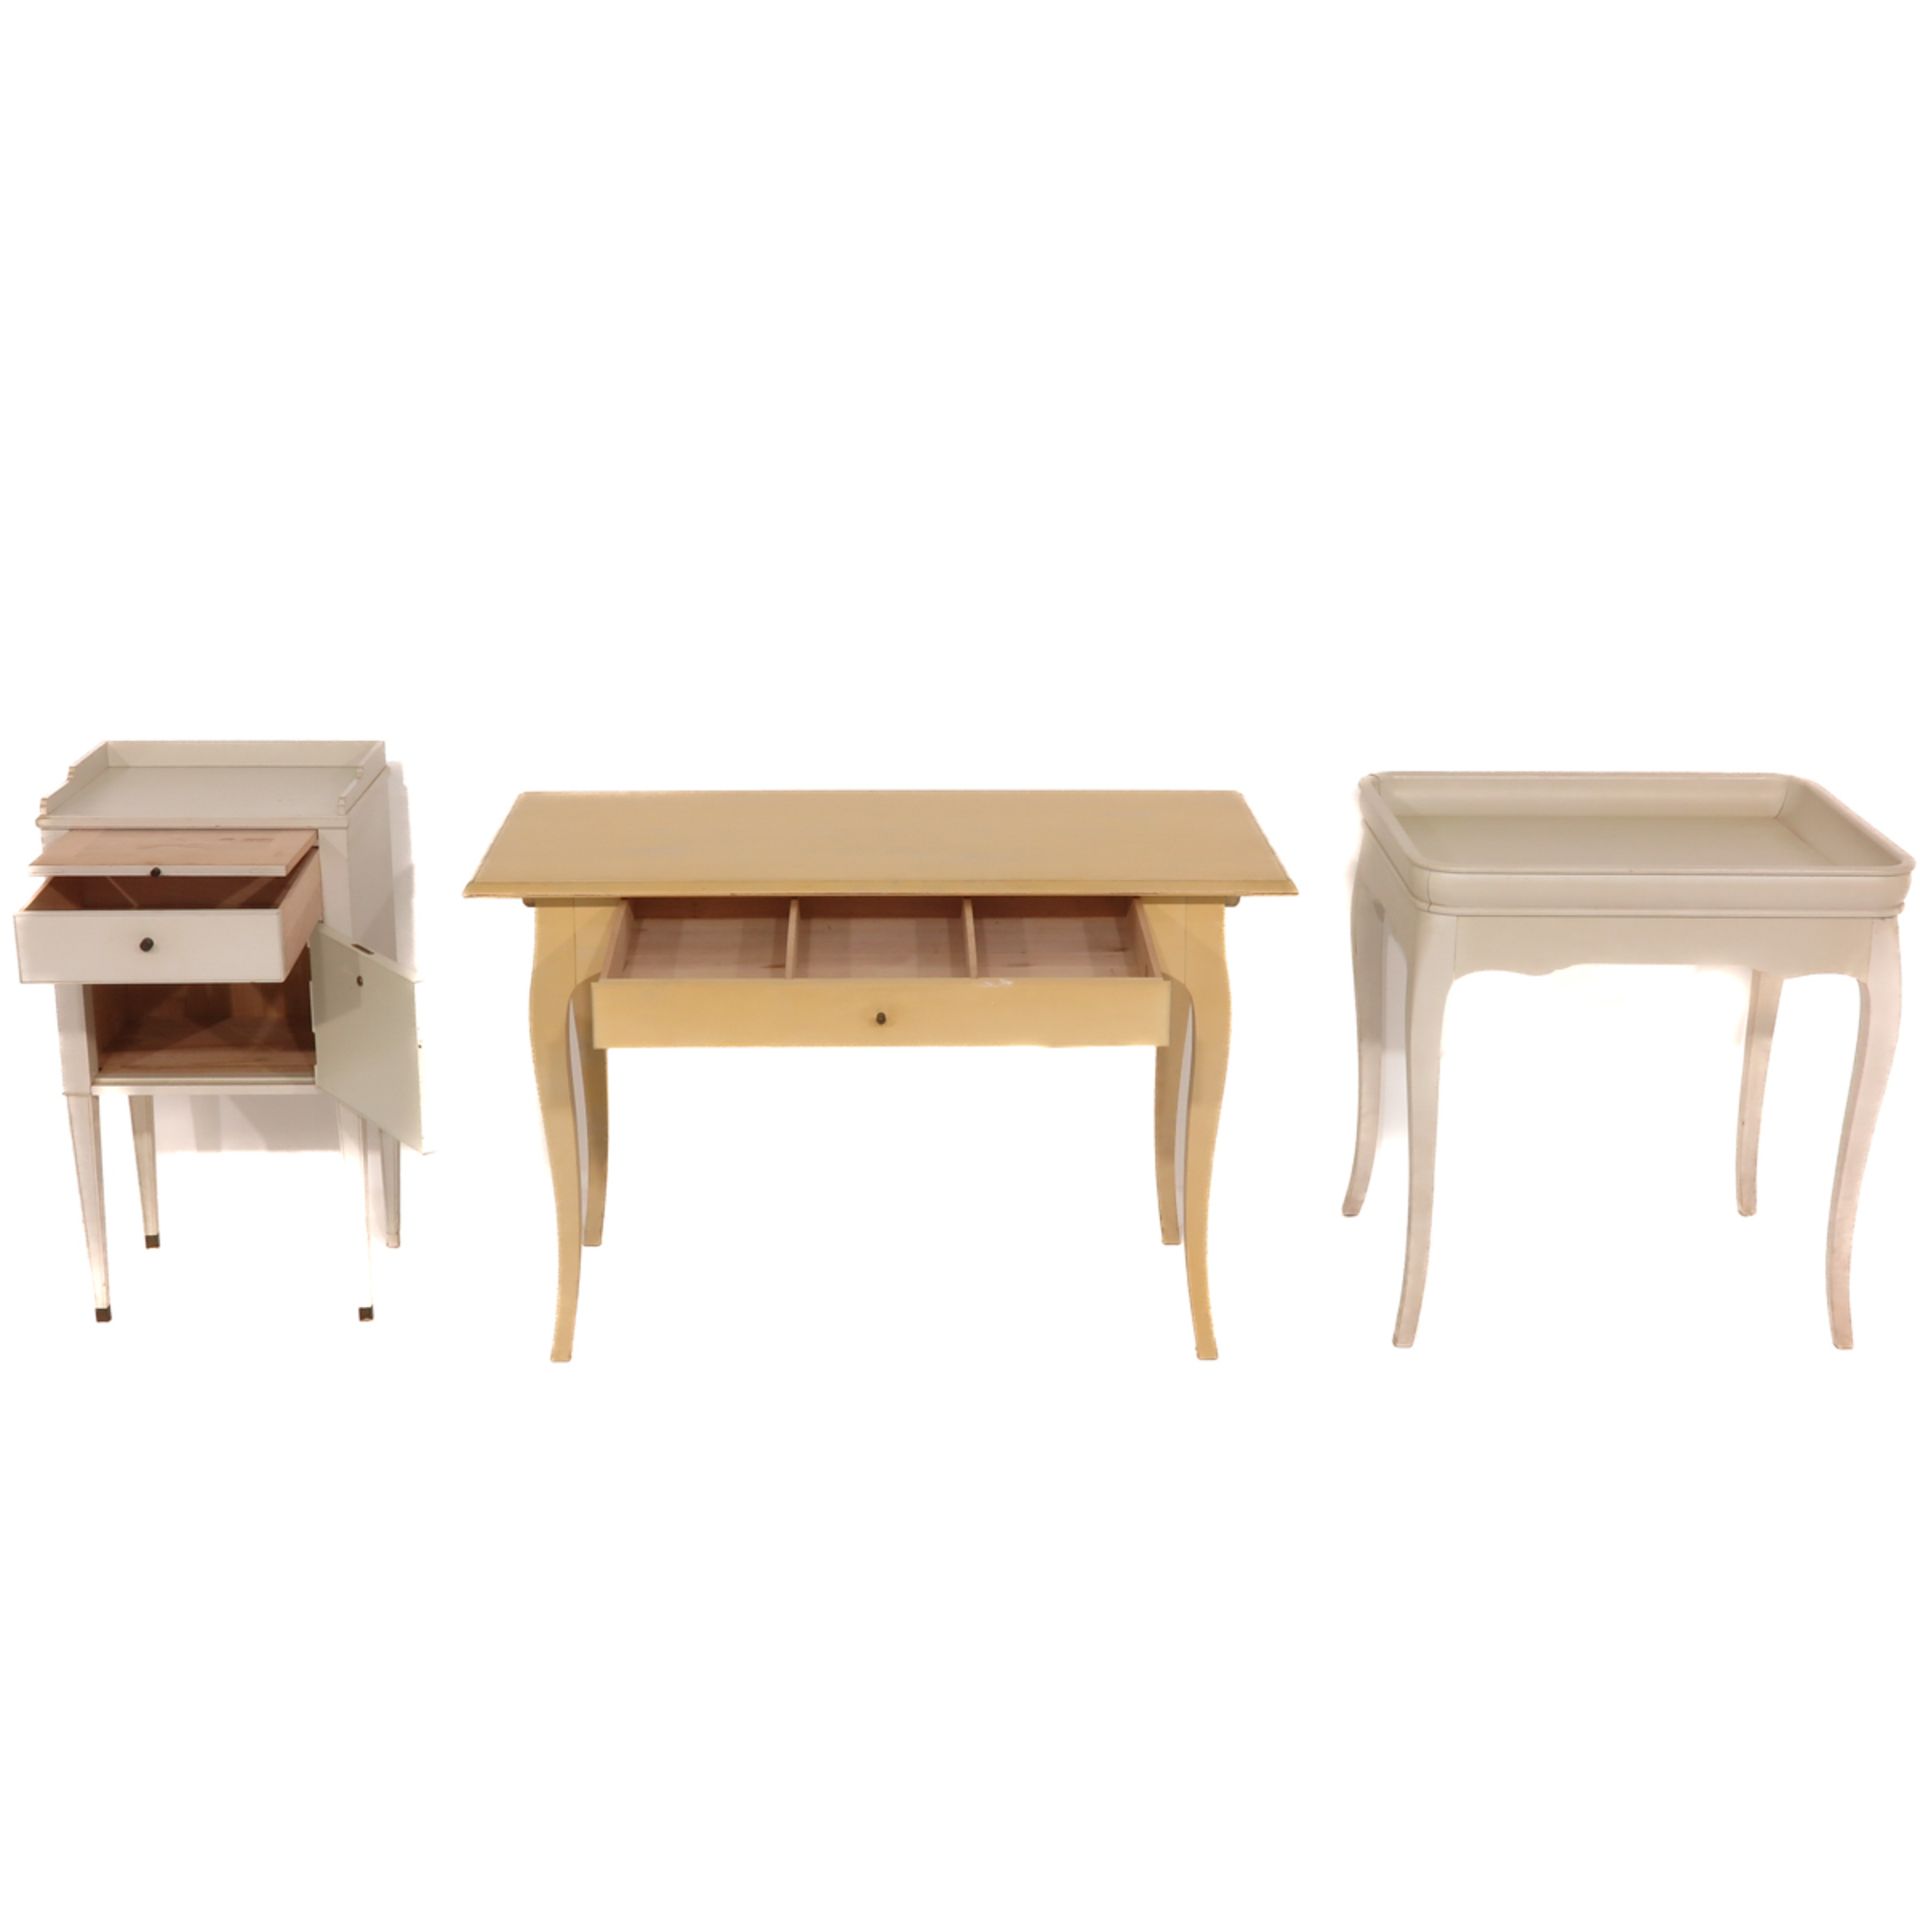 A Collection of Furniture Designed by Lars Sjoberg - Image 9 of 10